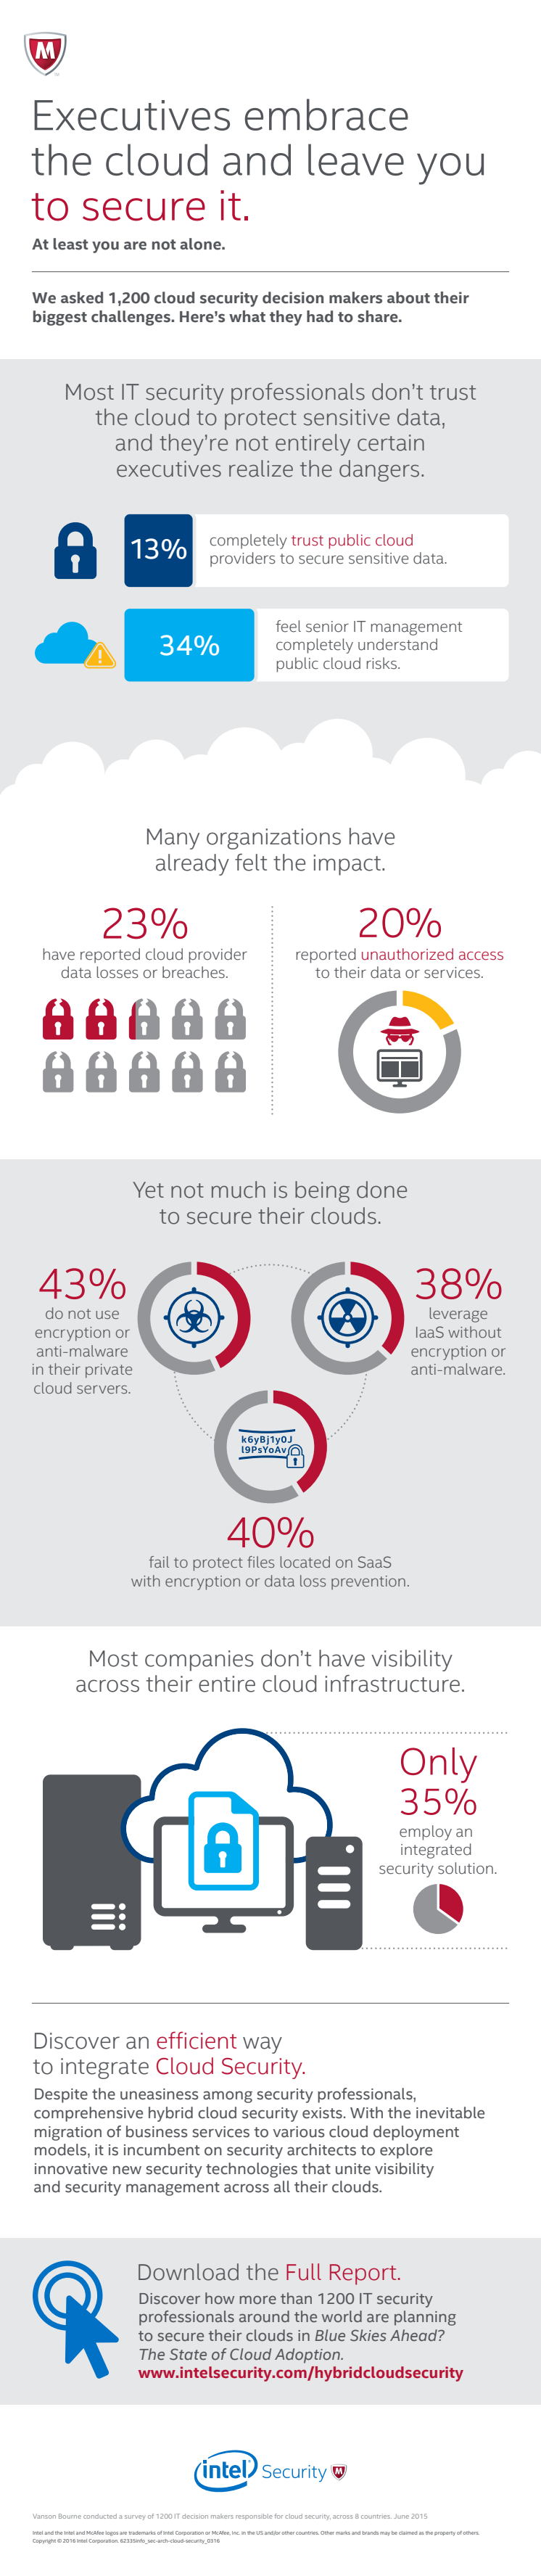 Infographic: Cloud Security